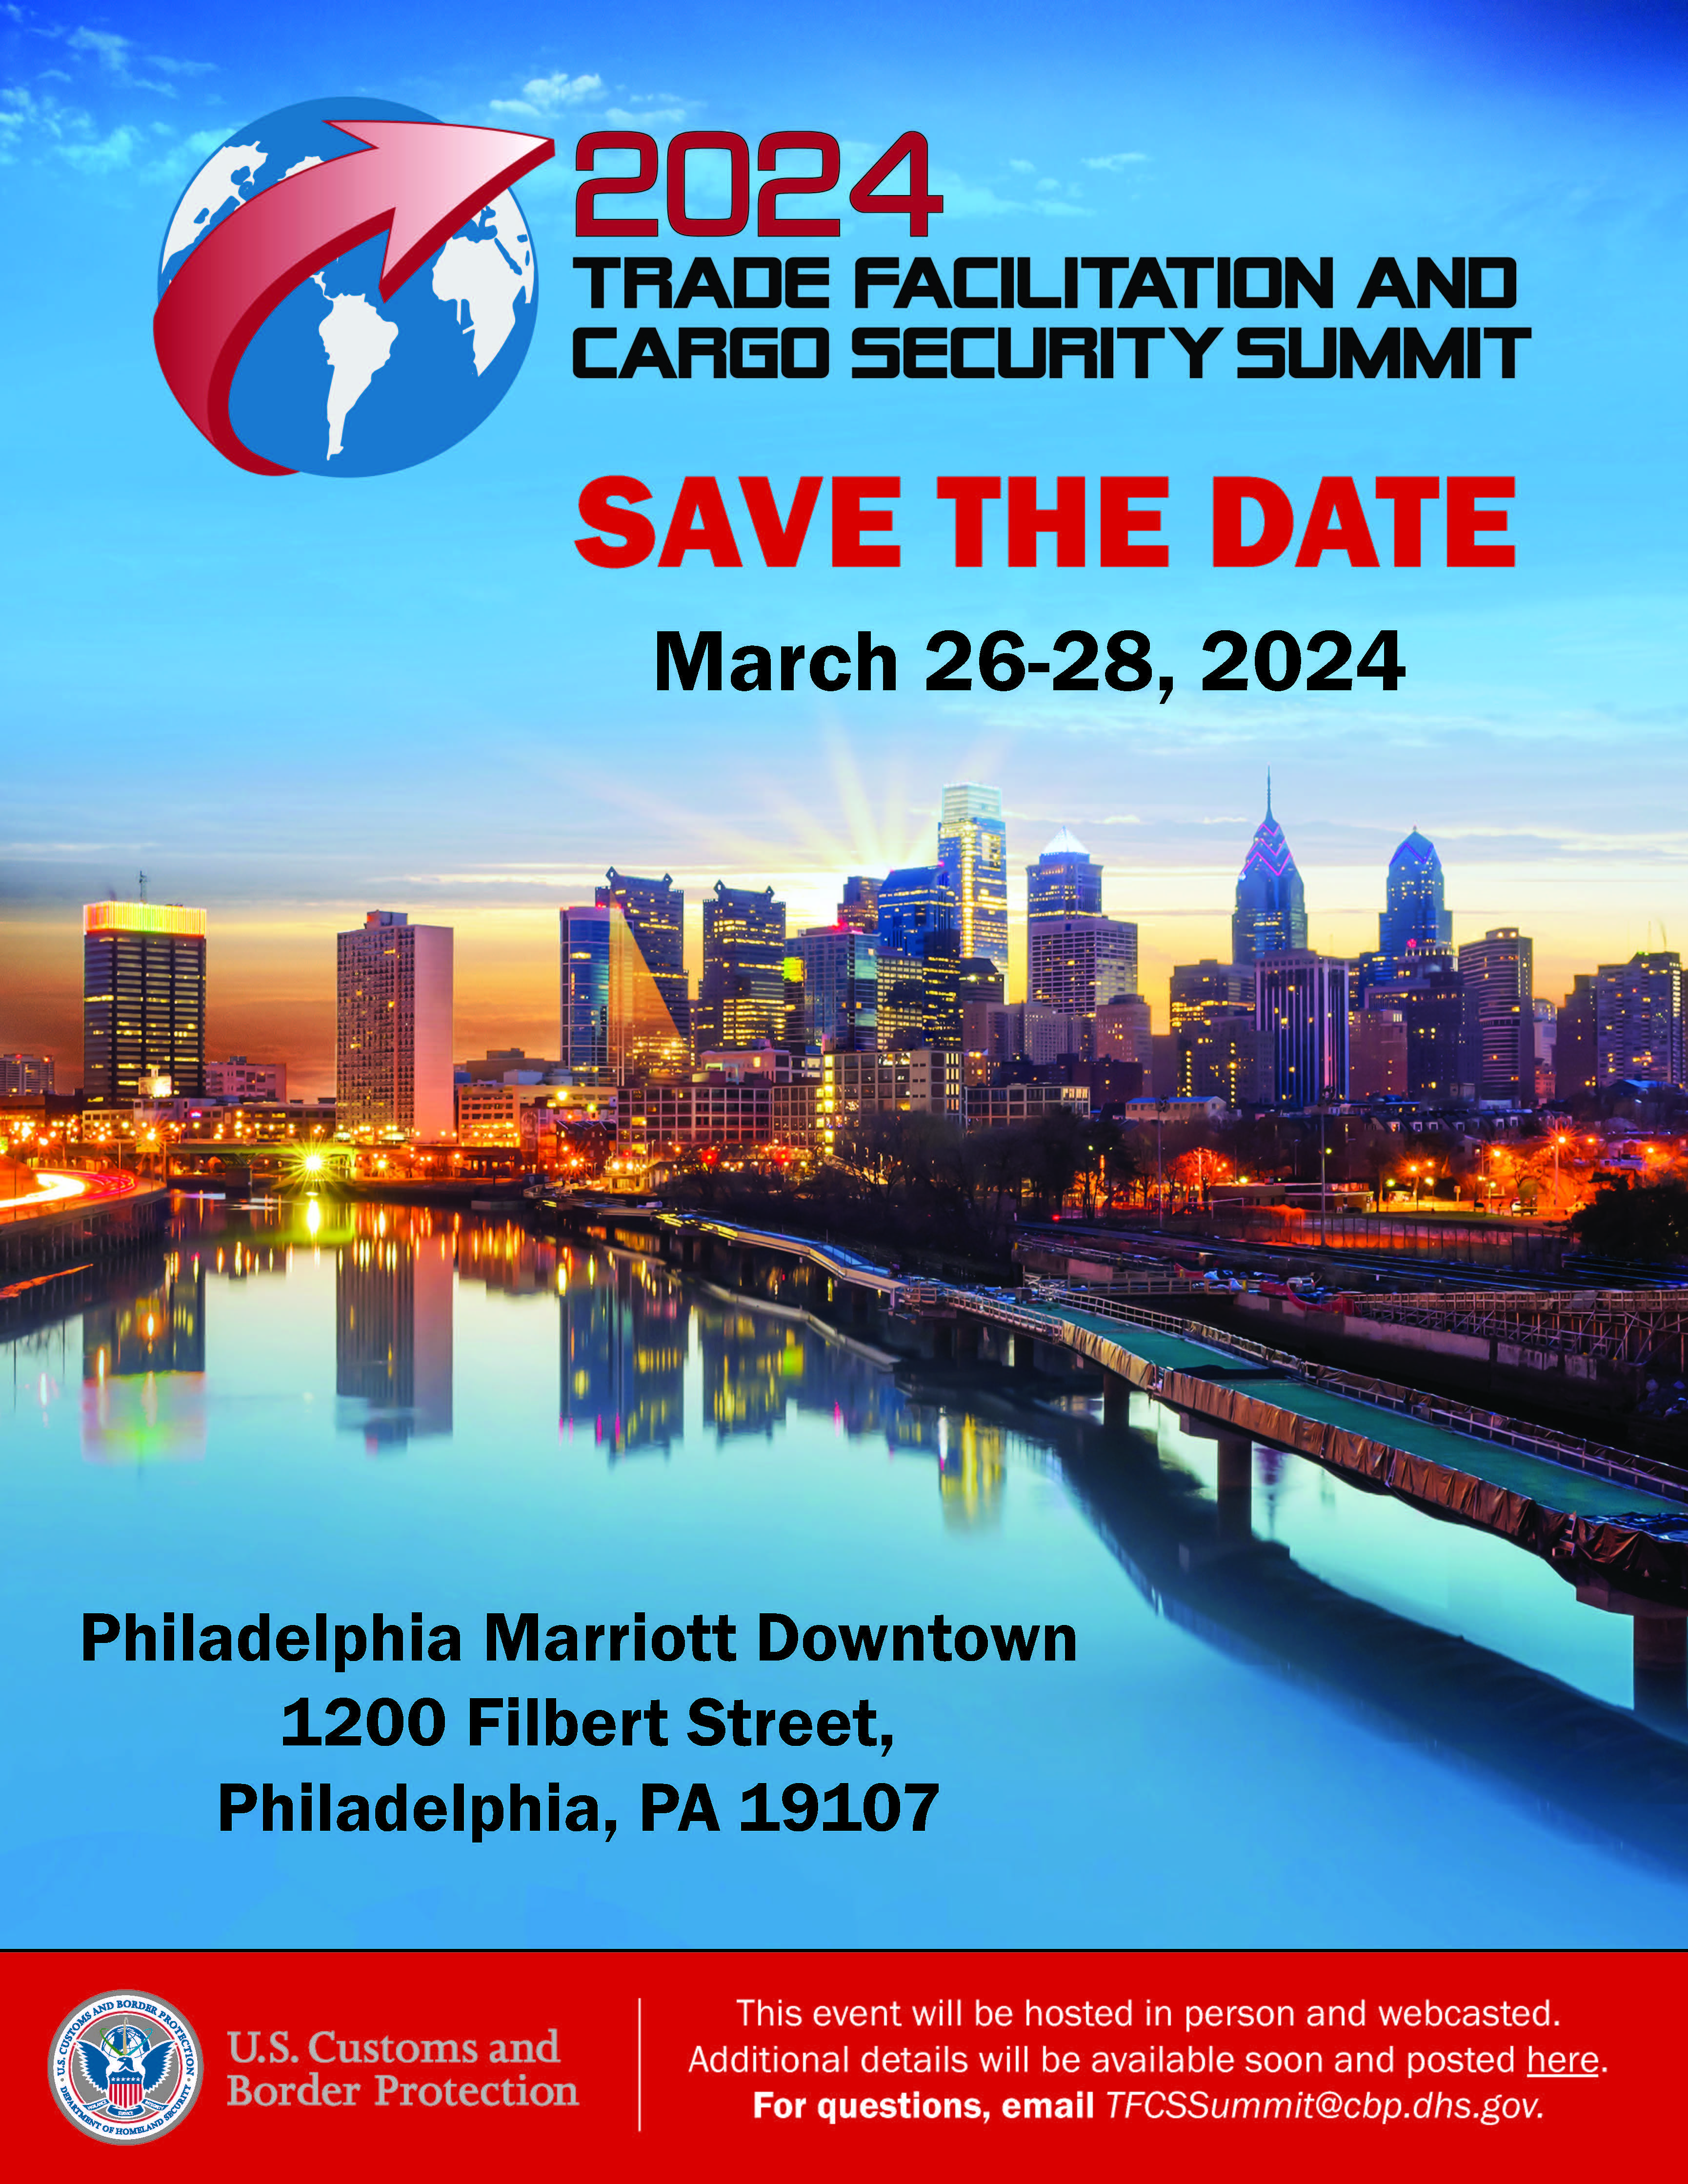 2024 Trade Facilitation and Cargo Security Summit - Save the Date: March 26-28, 2024, Philadephia Marriott Downtown, 1200 Filbert Street, Philadelphia, PA, 19107